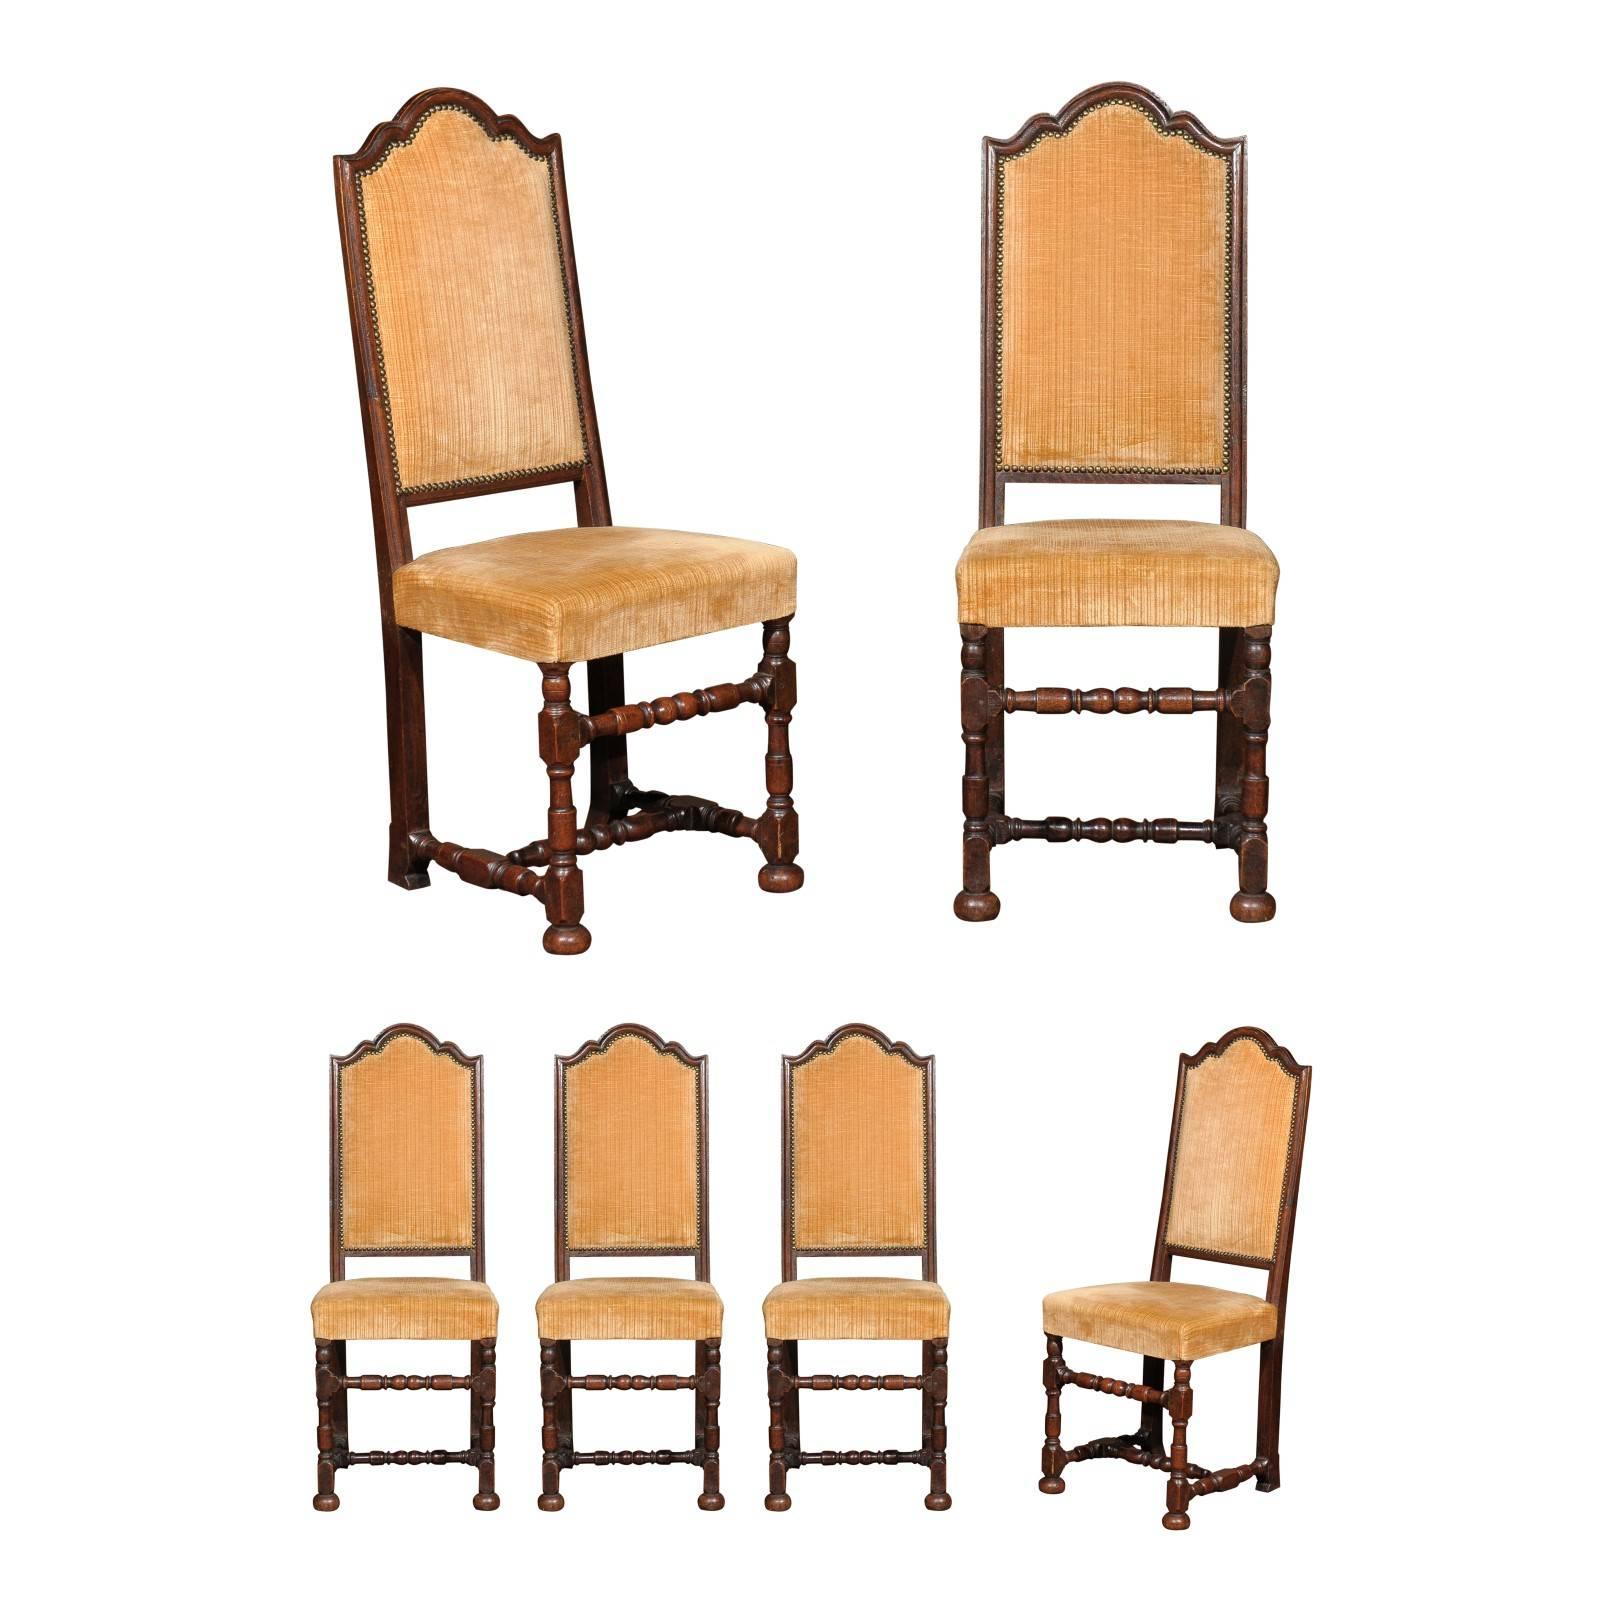 Set Six of Mid-19th Century Florentine Dining Chairs